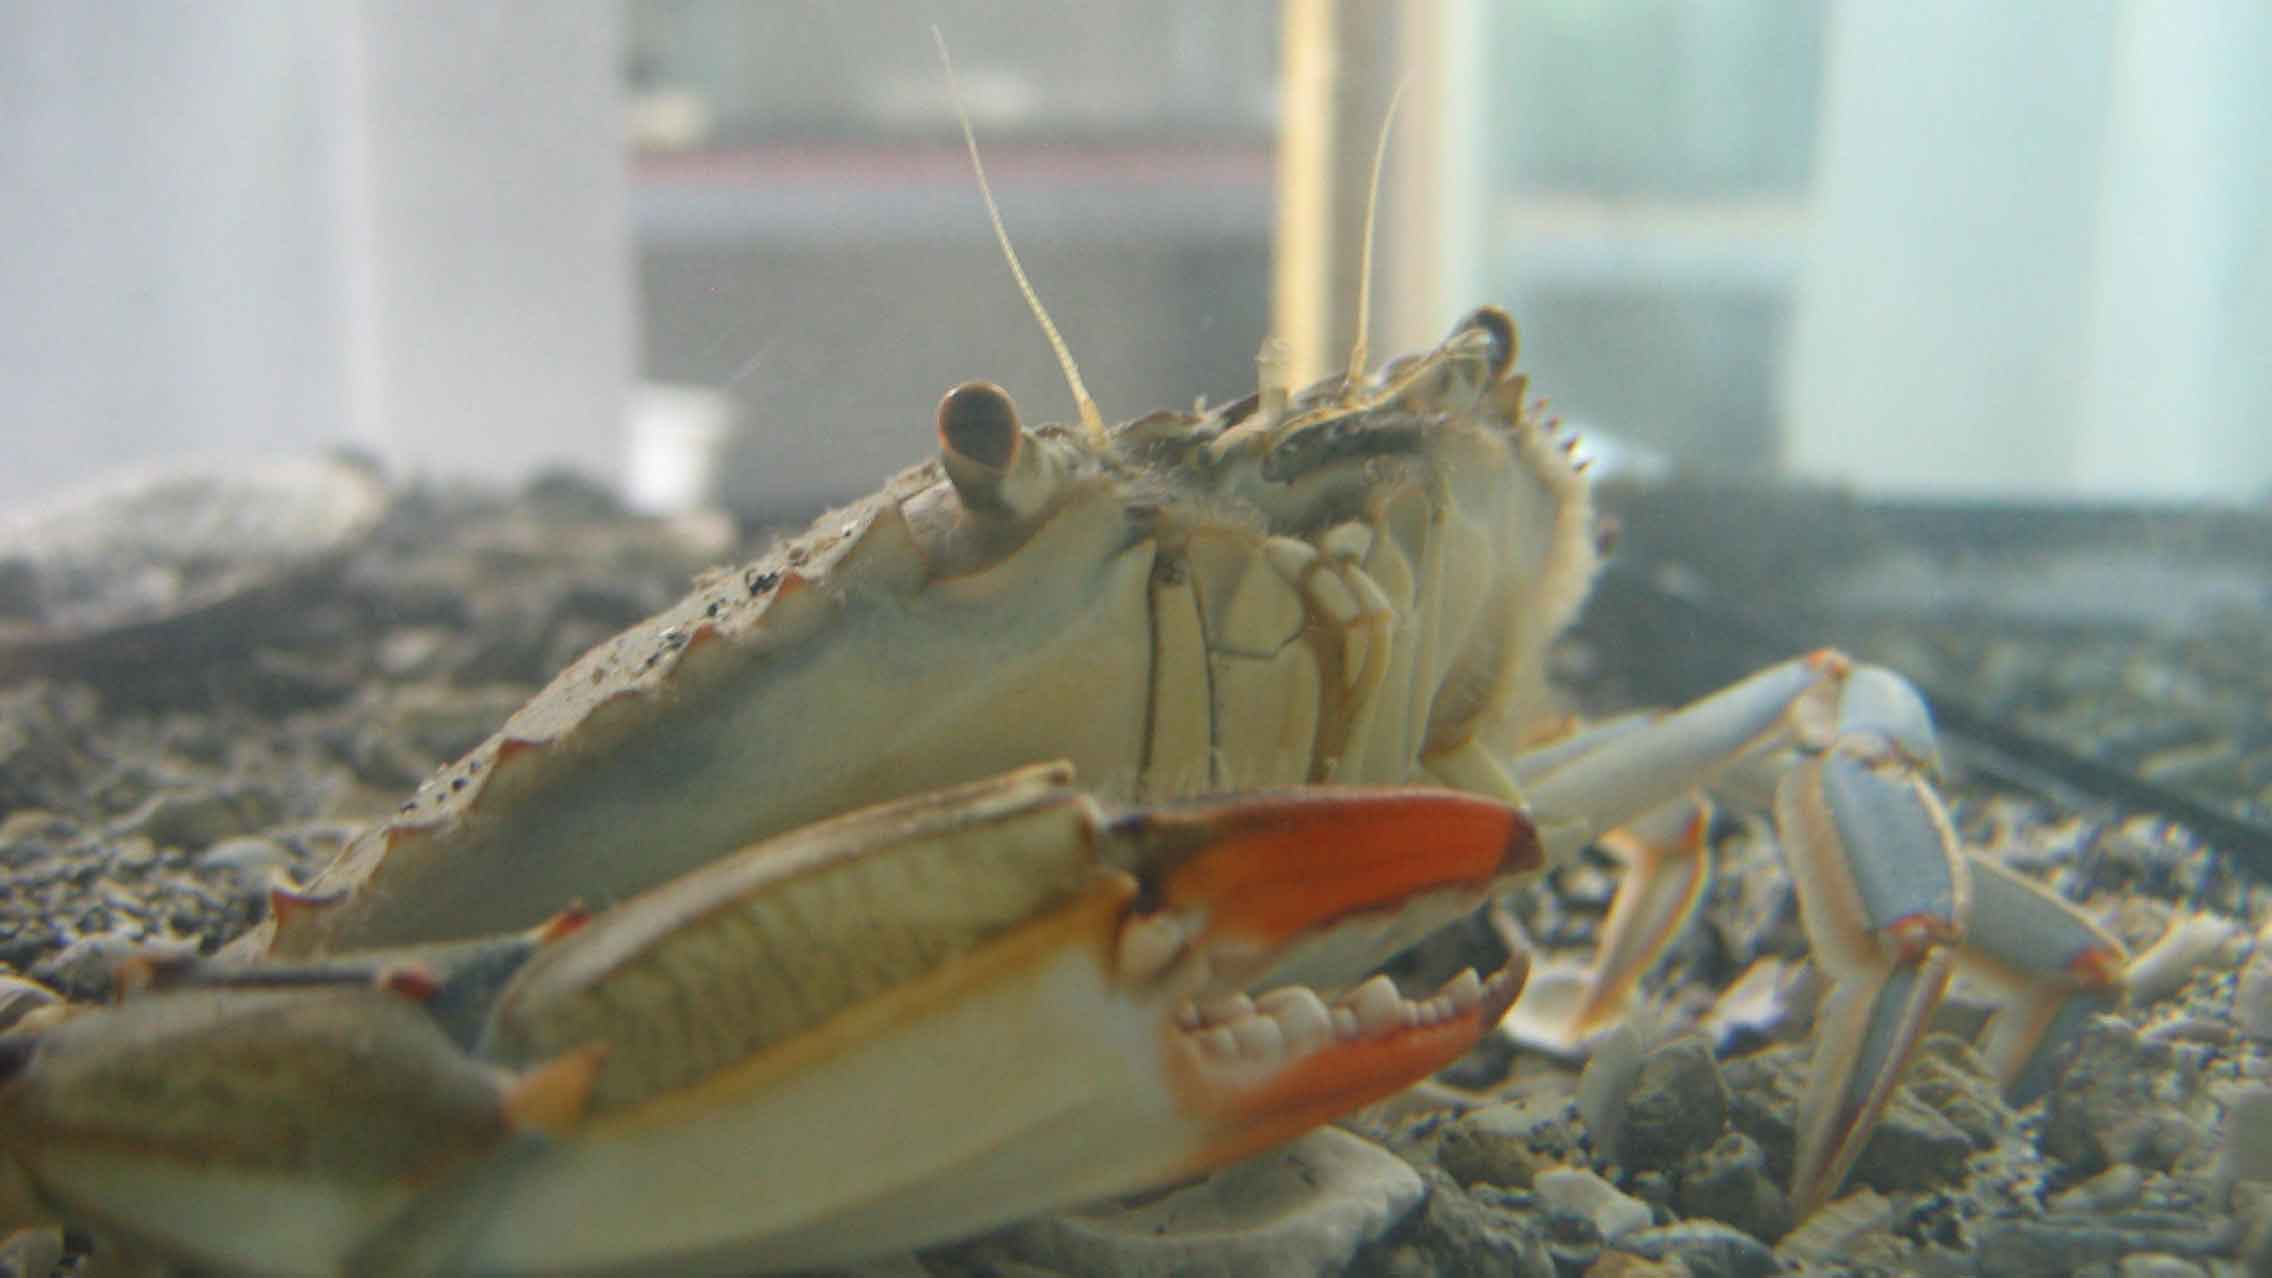 A blue crab looking at the camera in a tank